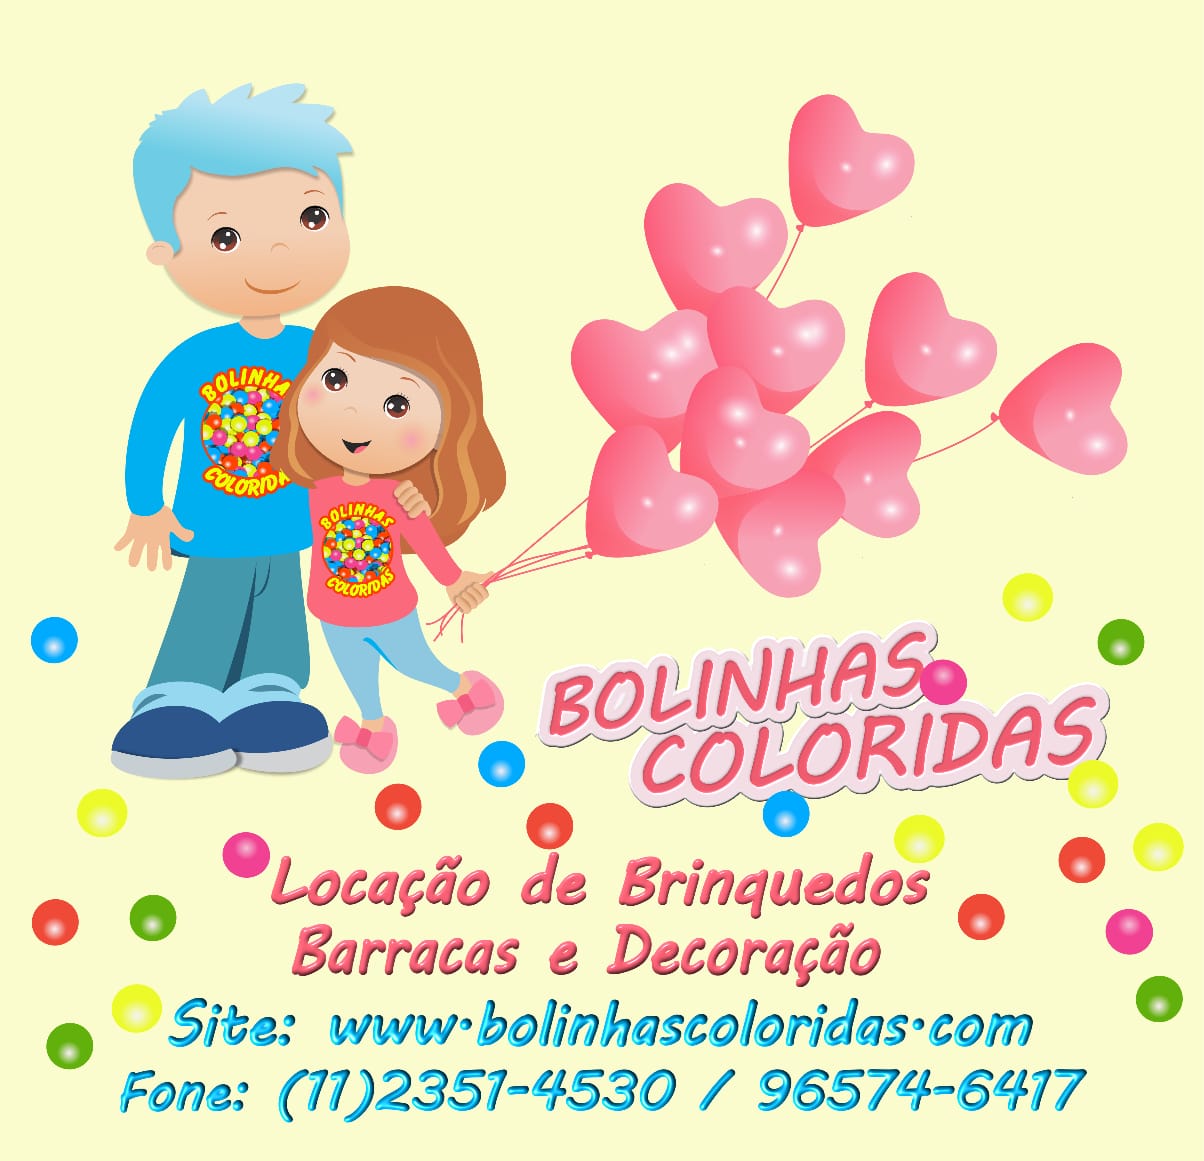 Bolinhas Coloridas GIF - Find & Share on GIPHY